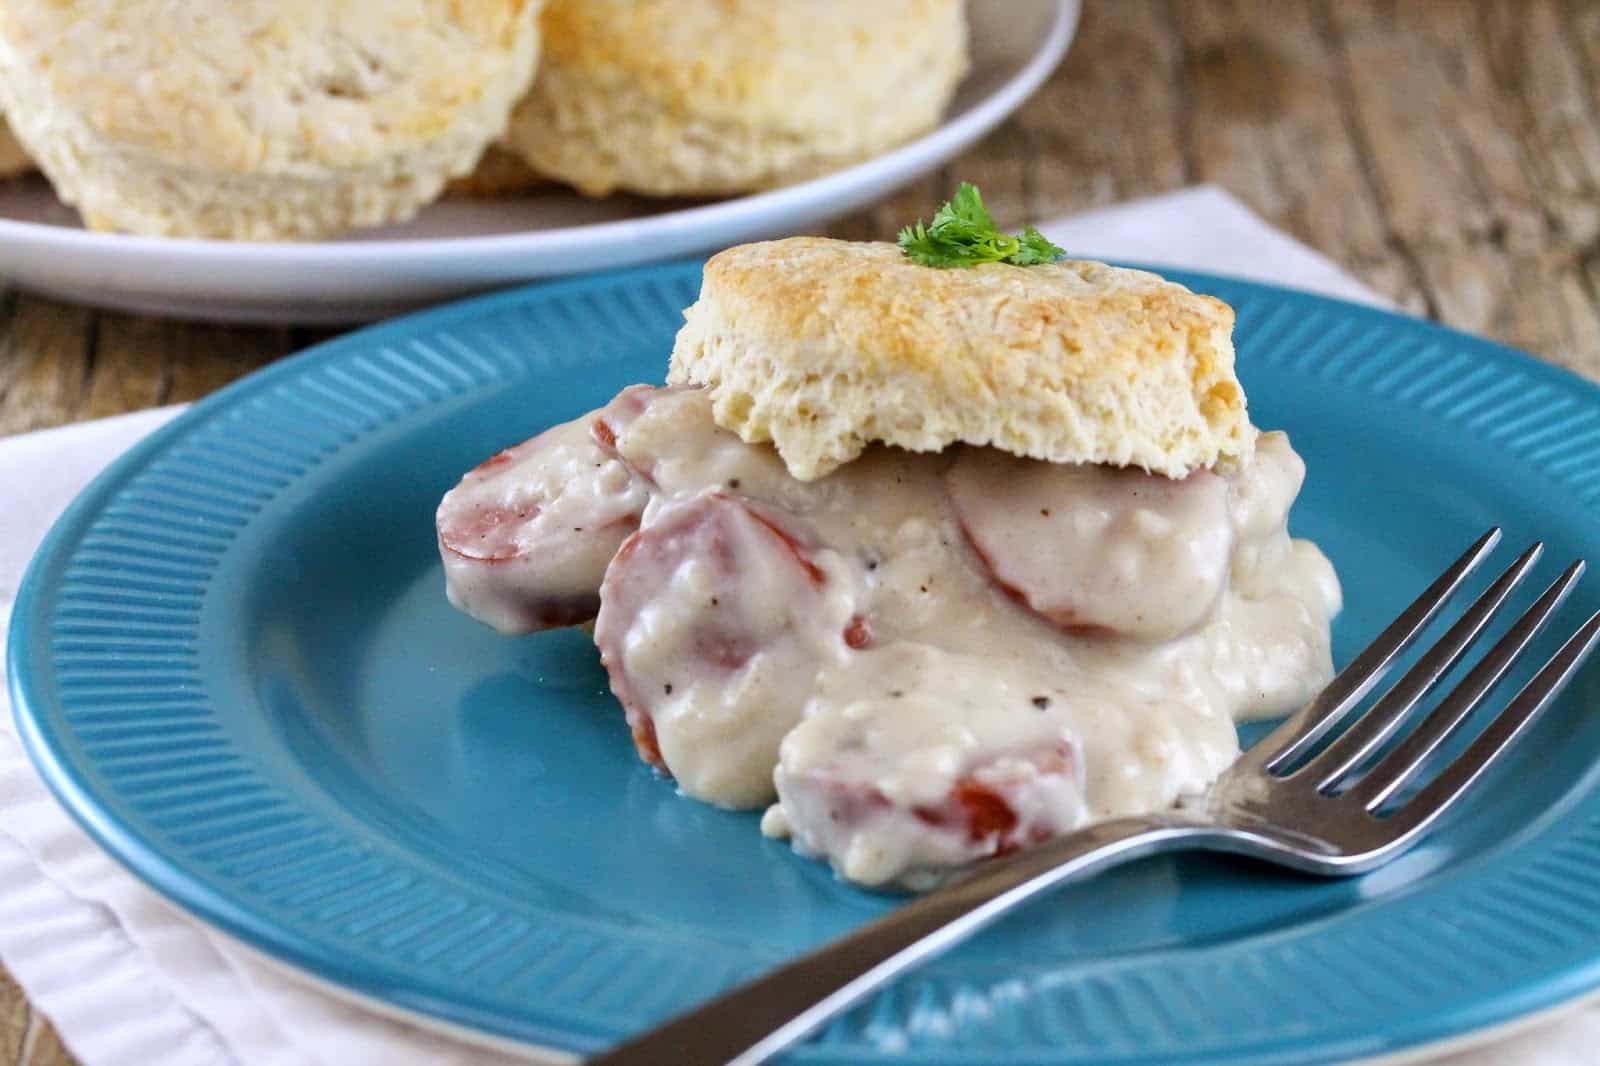 Gravy with slices of sausage is topped with a homemade biscuit and garnished with parsley